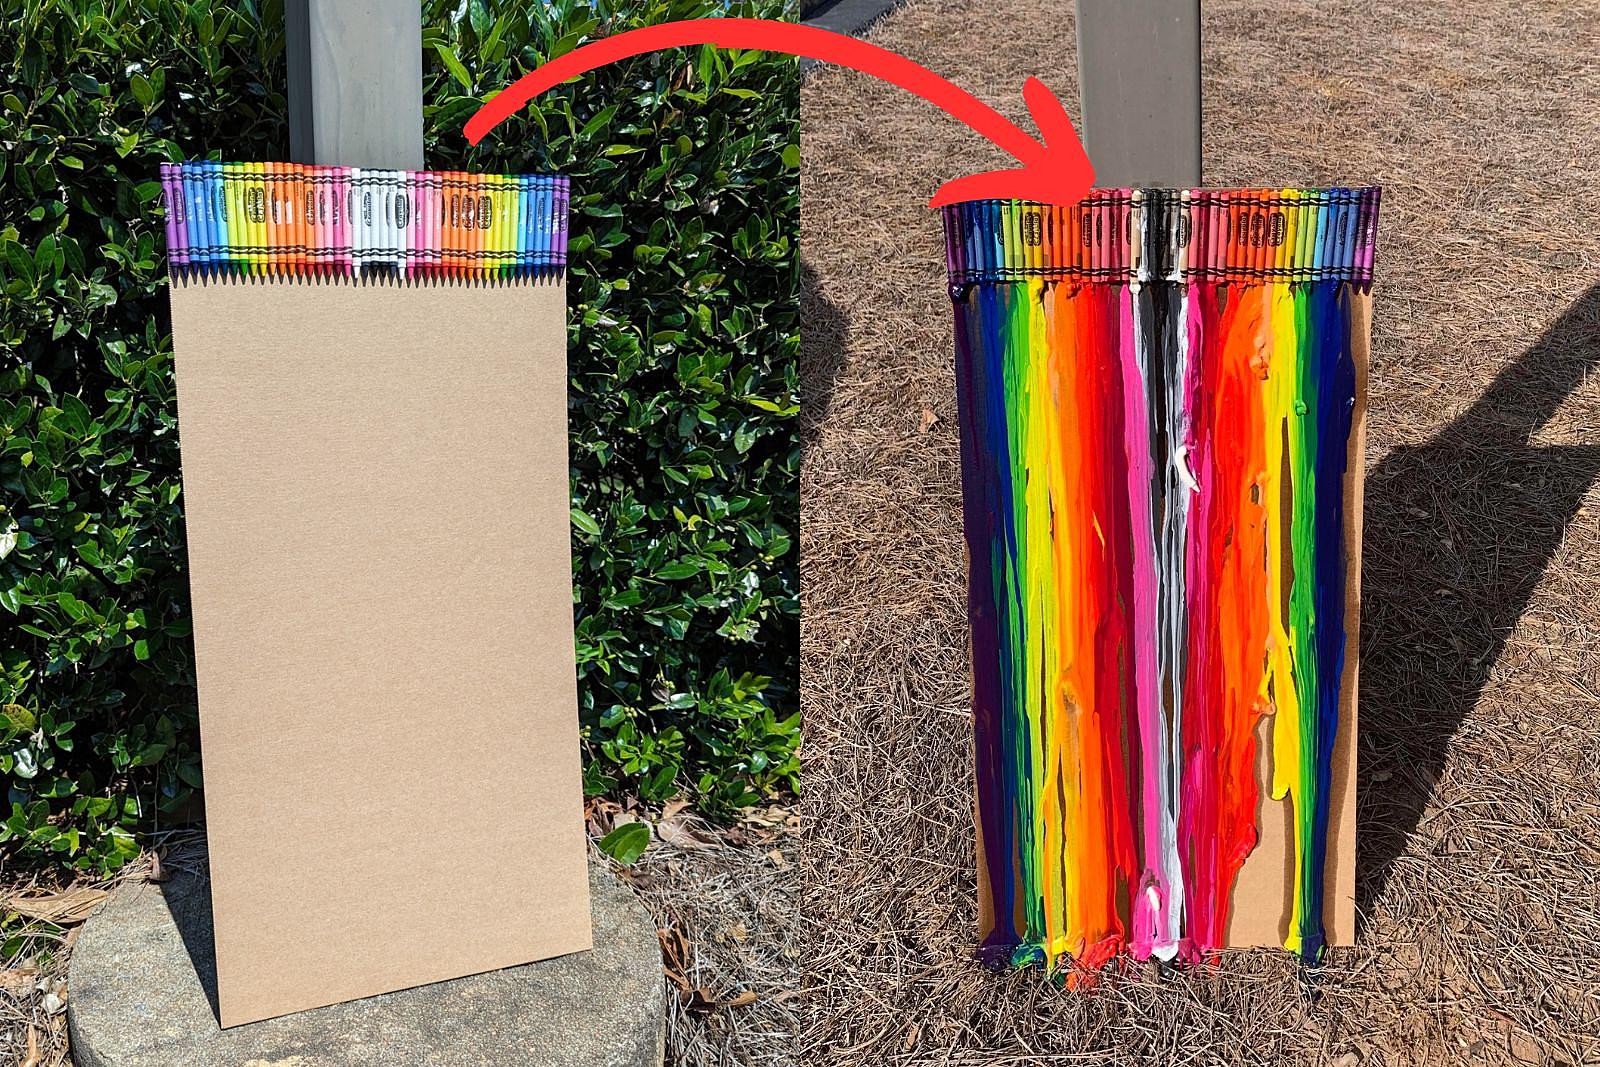 Make a Rainbow Crayon using the Melting Point for Crayons!